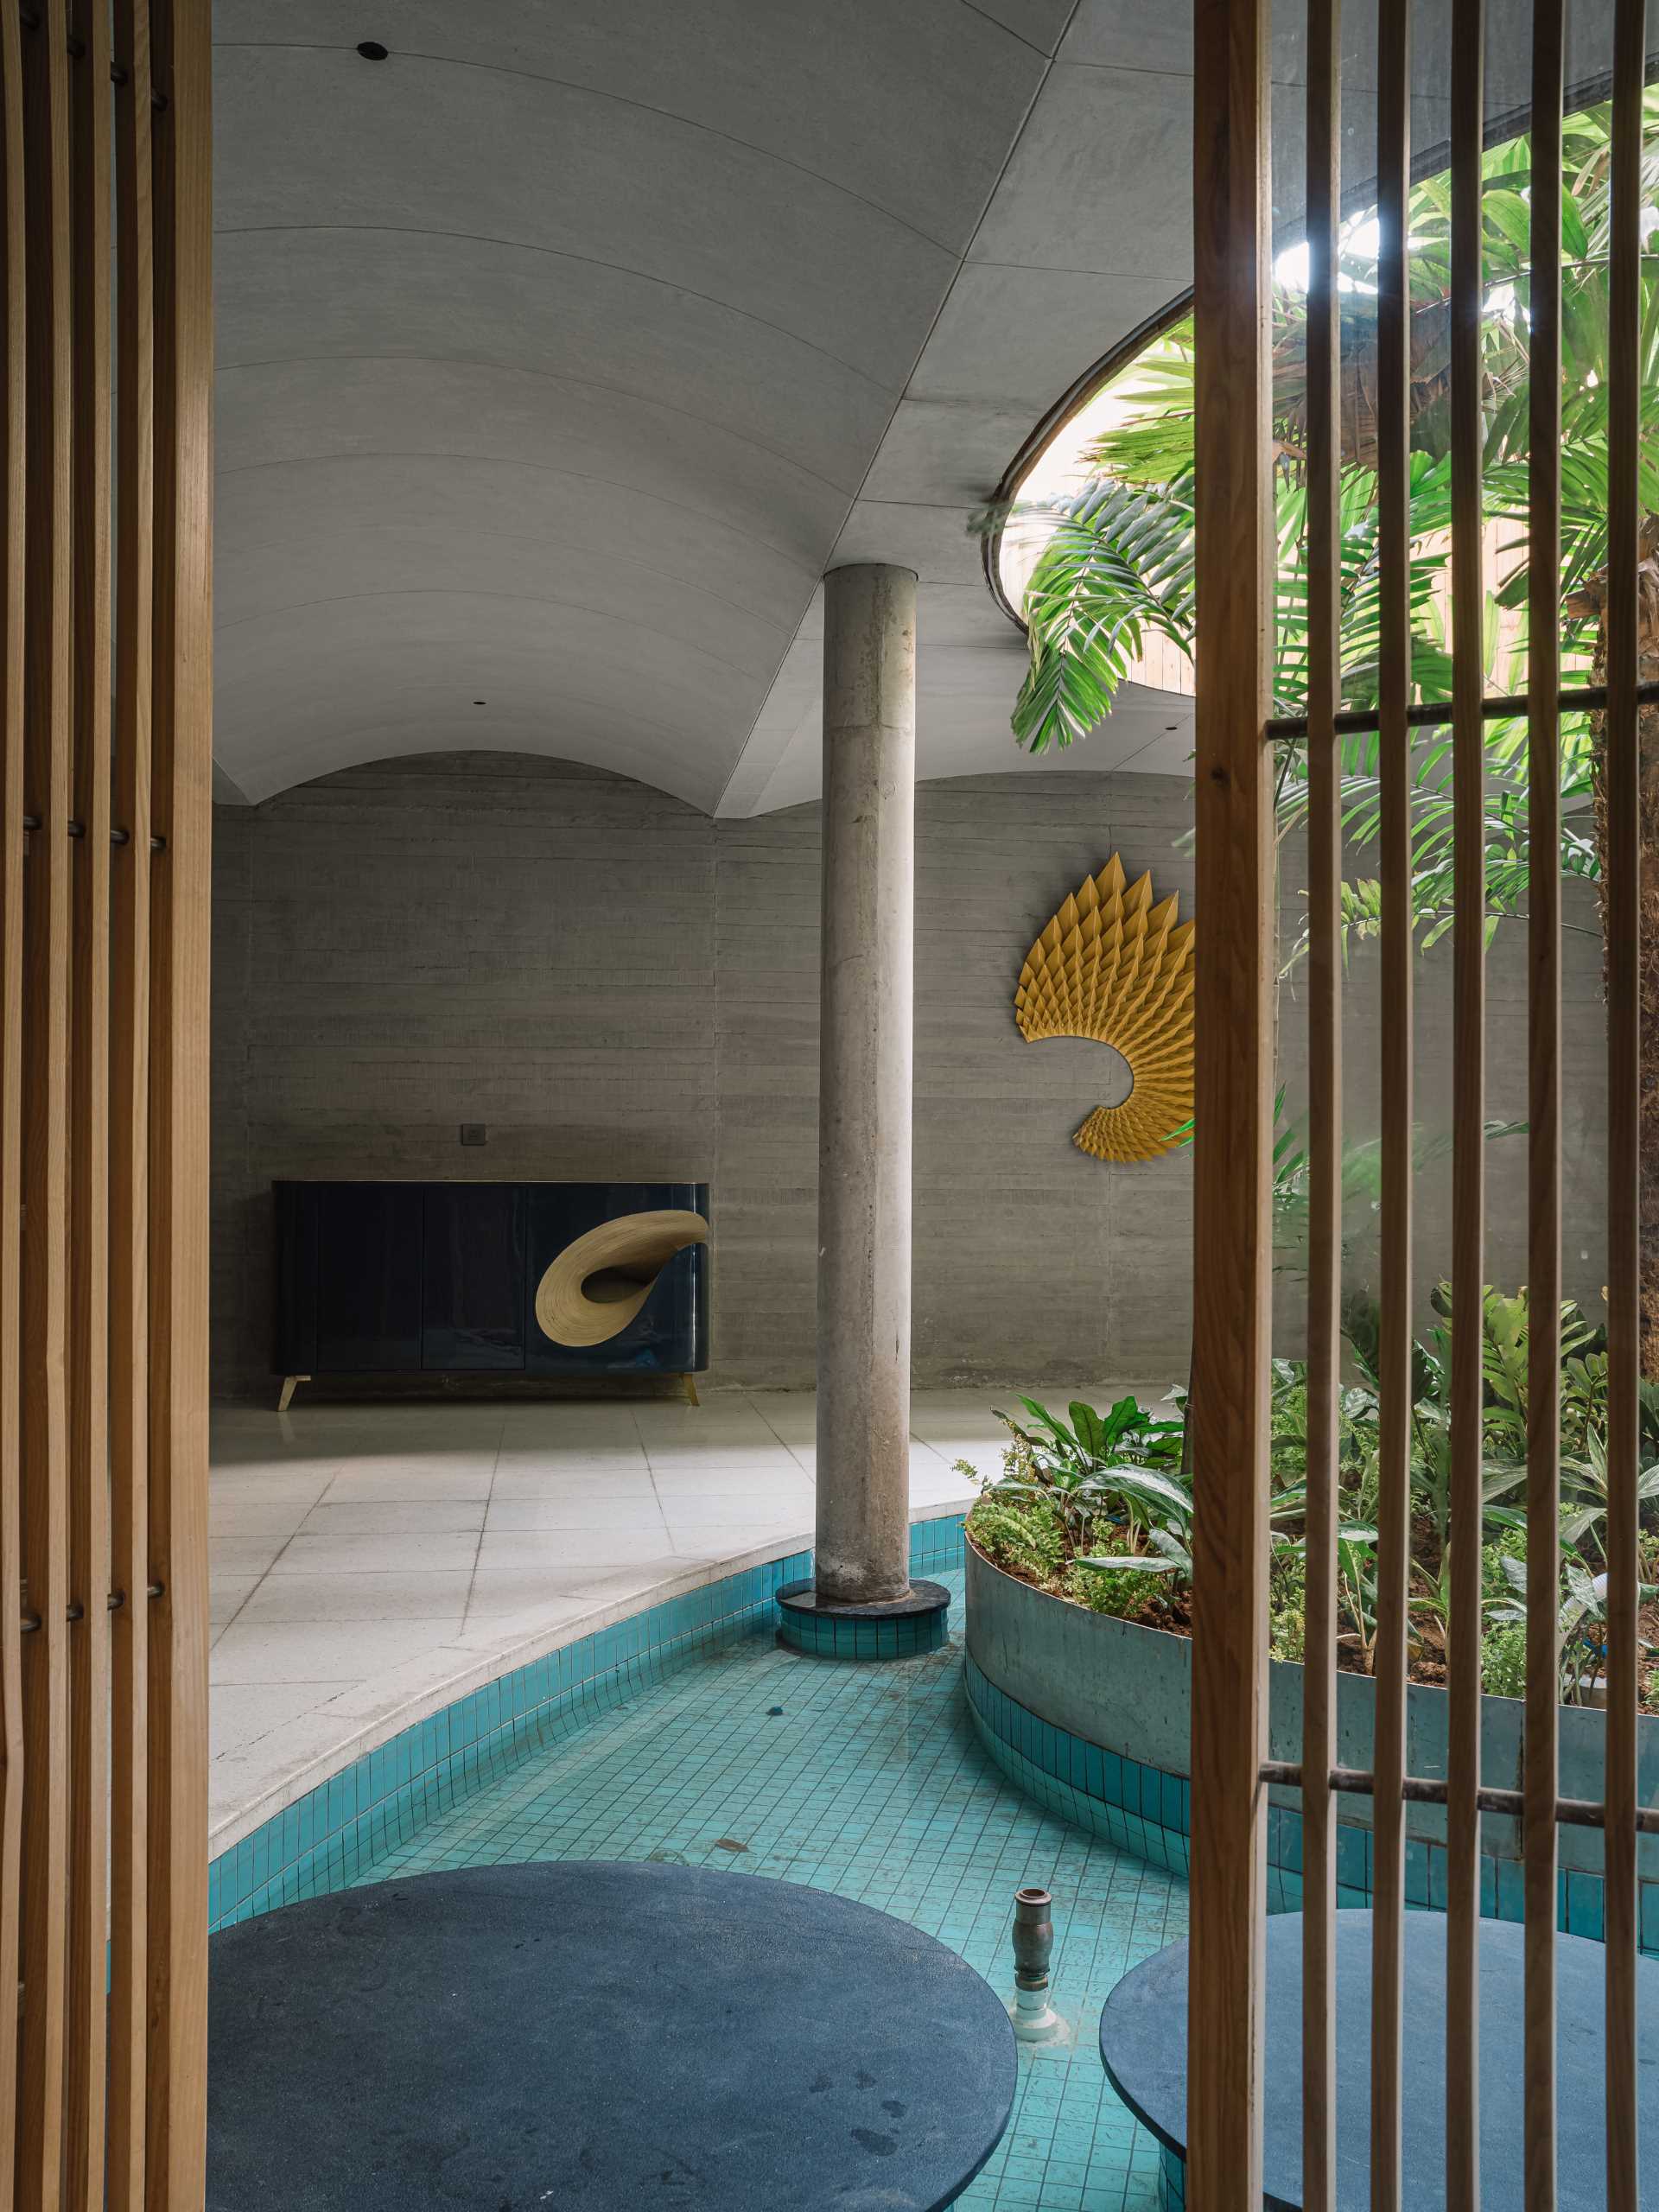 A quiet area of this modern home includes a massage room, a water feature with a garden island, and a sculptural wall.